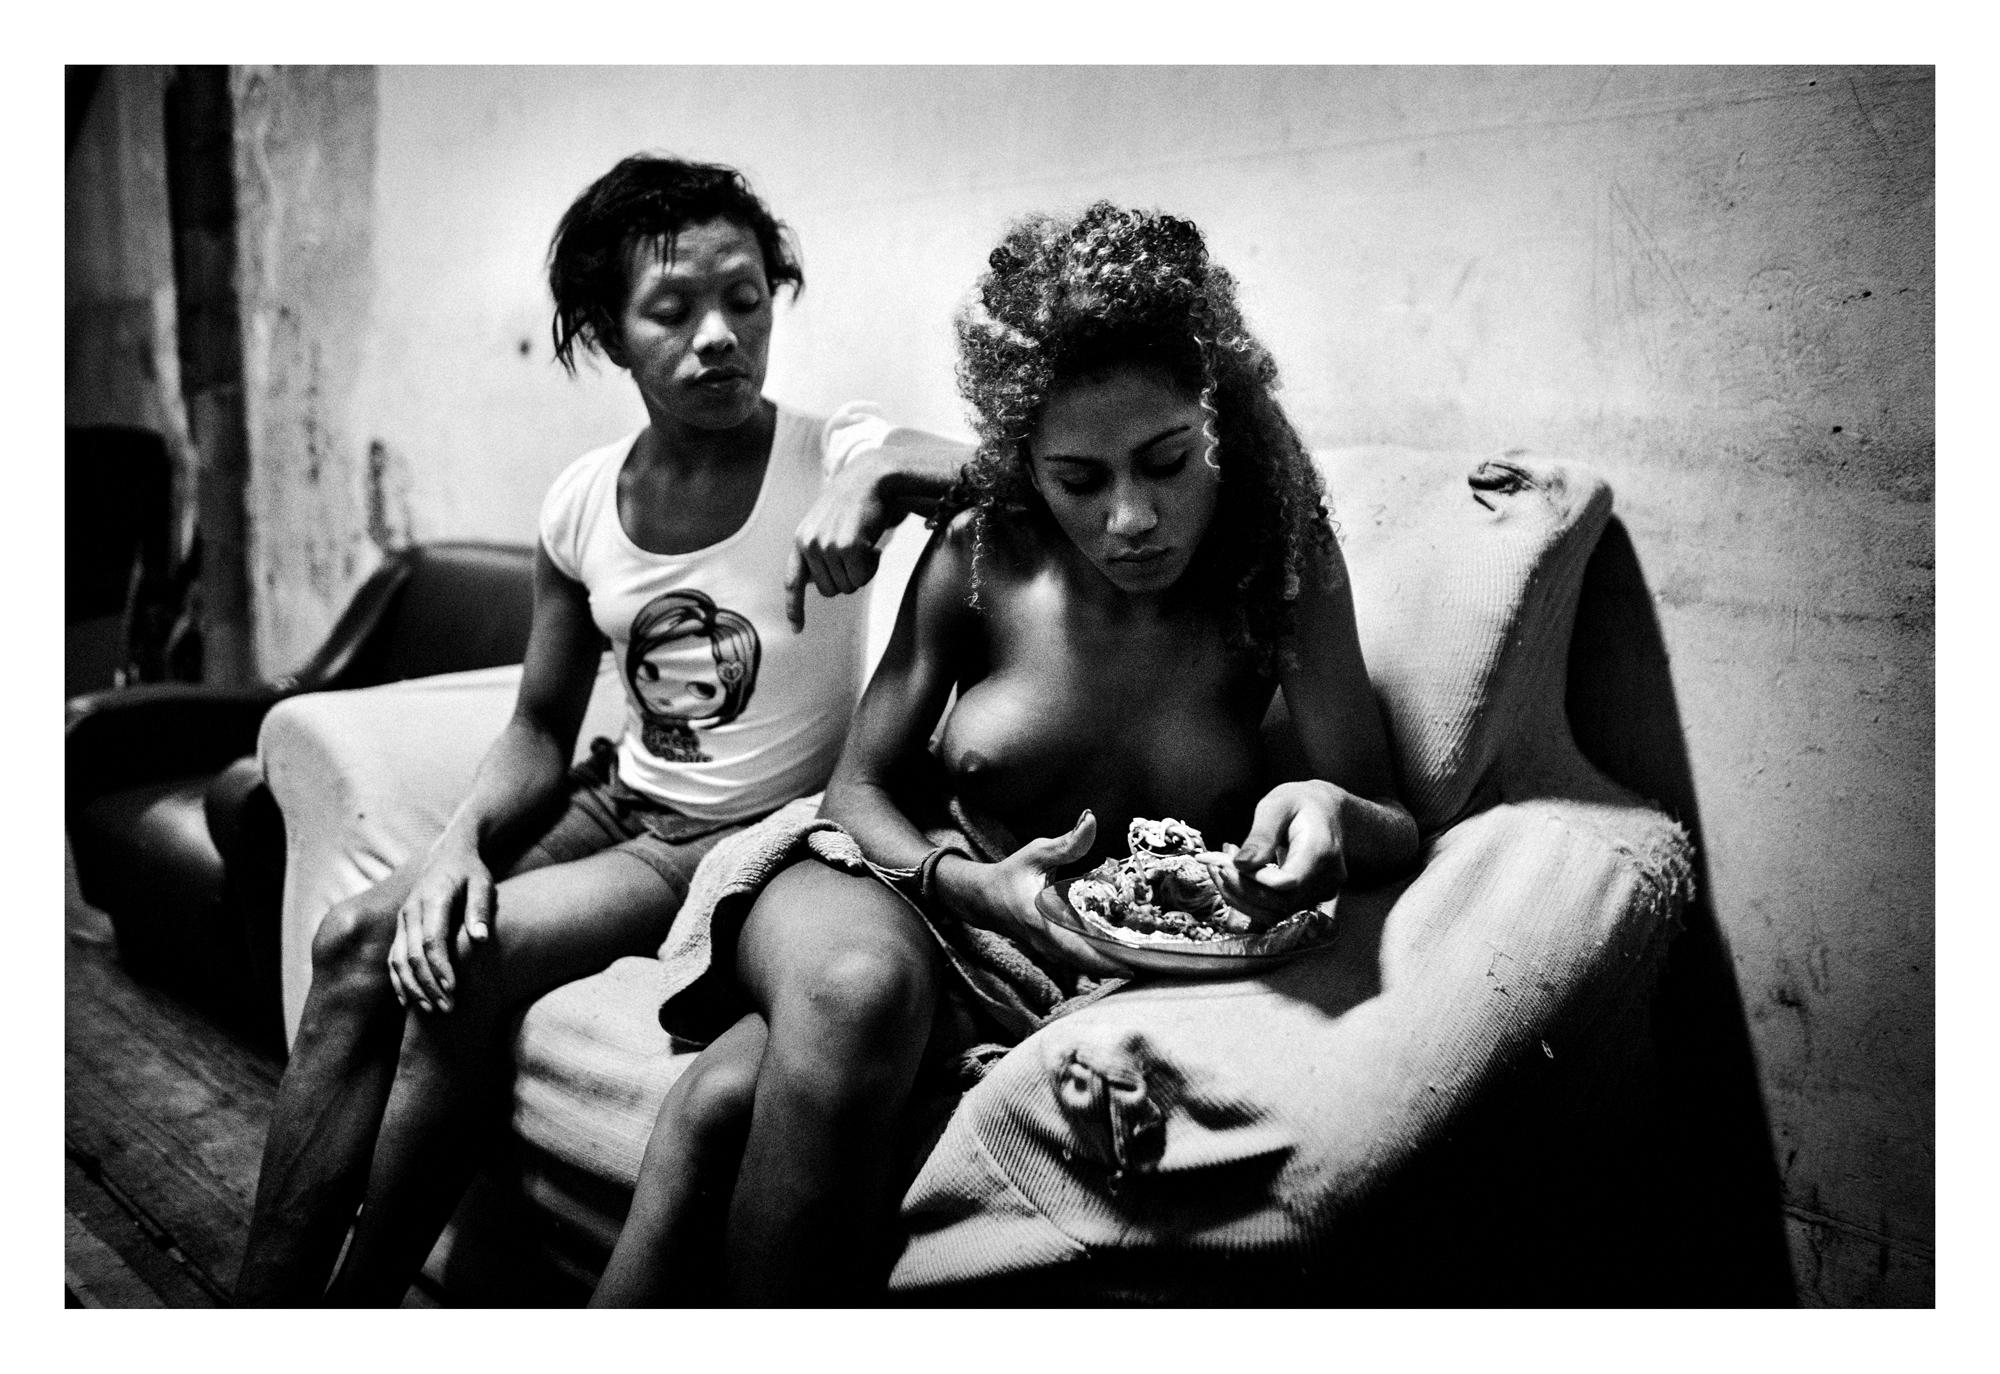 All imperfect things - Rio de Janeiro, Brazil.
April 2012.
Shaw (right) is a...